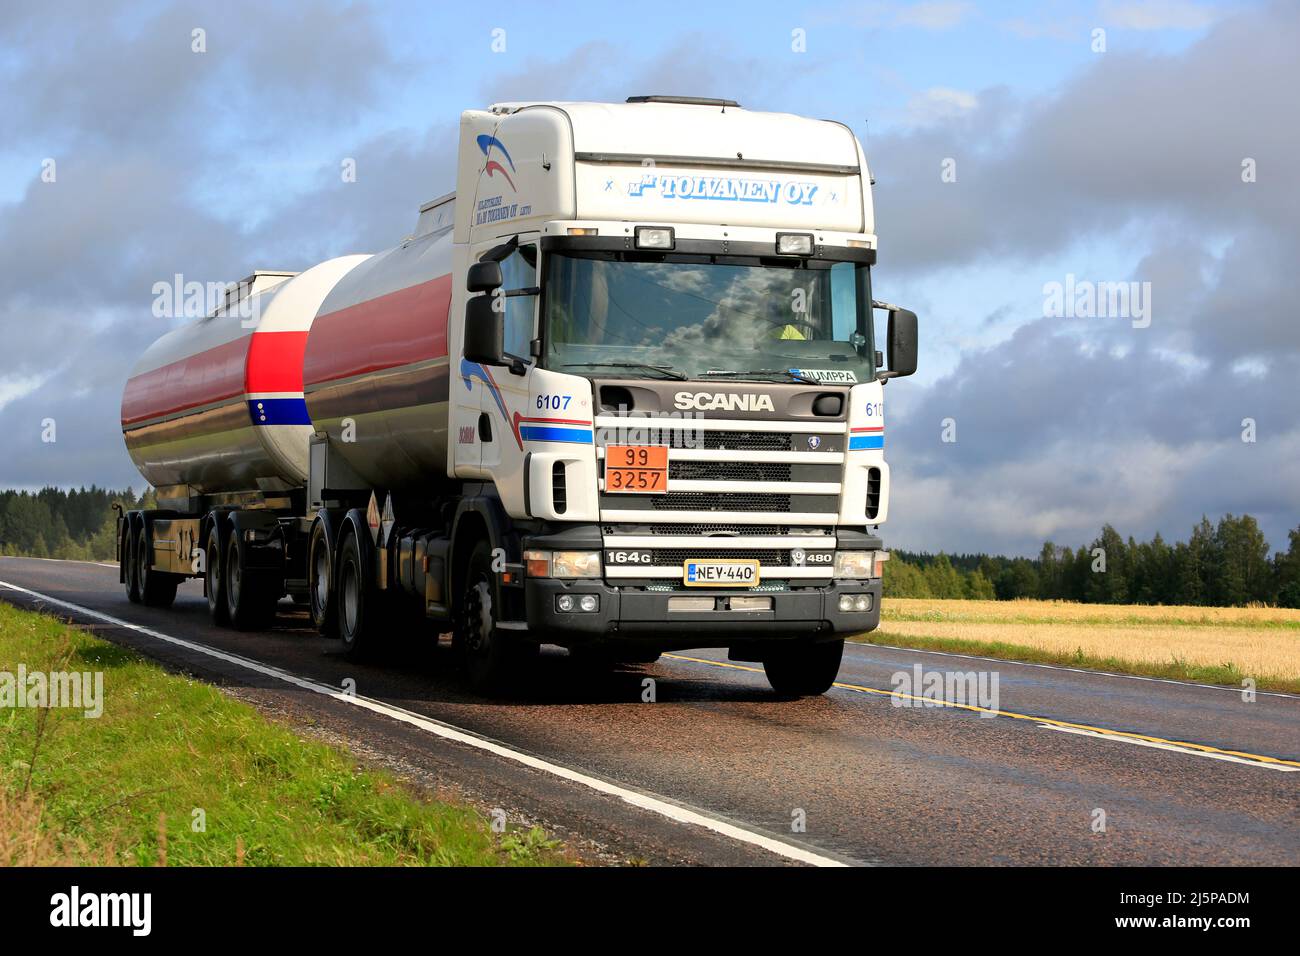 164G Scania tank truck at speed hauling ADR 99-3257, Elevated temperature liquid along road E63 in Jämsä, Finland. August 23, 2018. Stock Photo